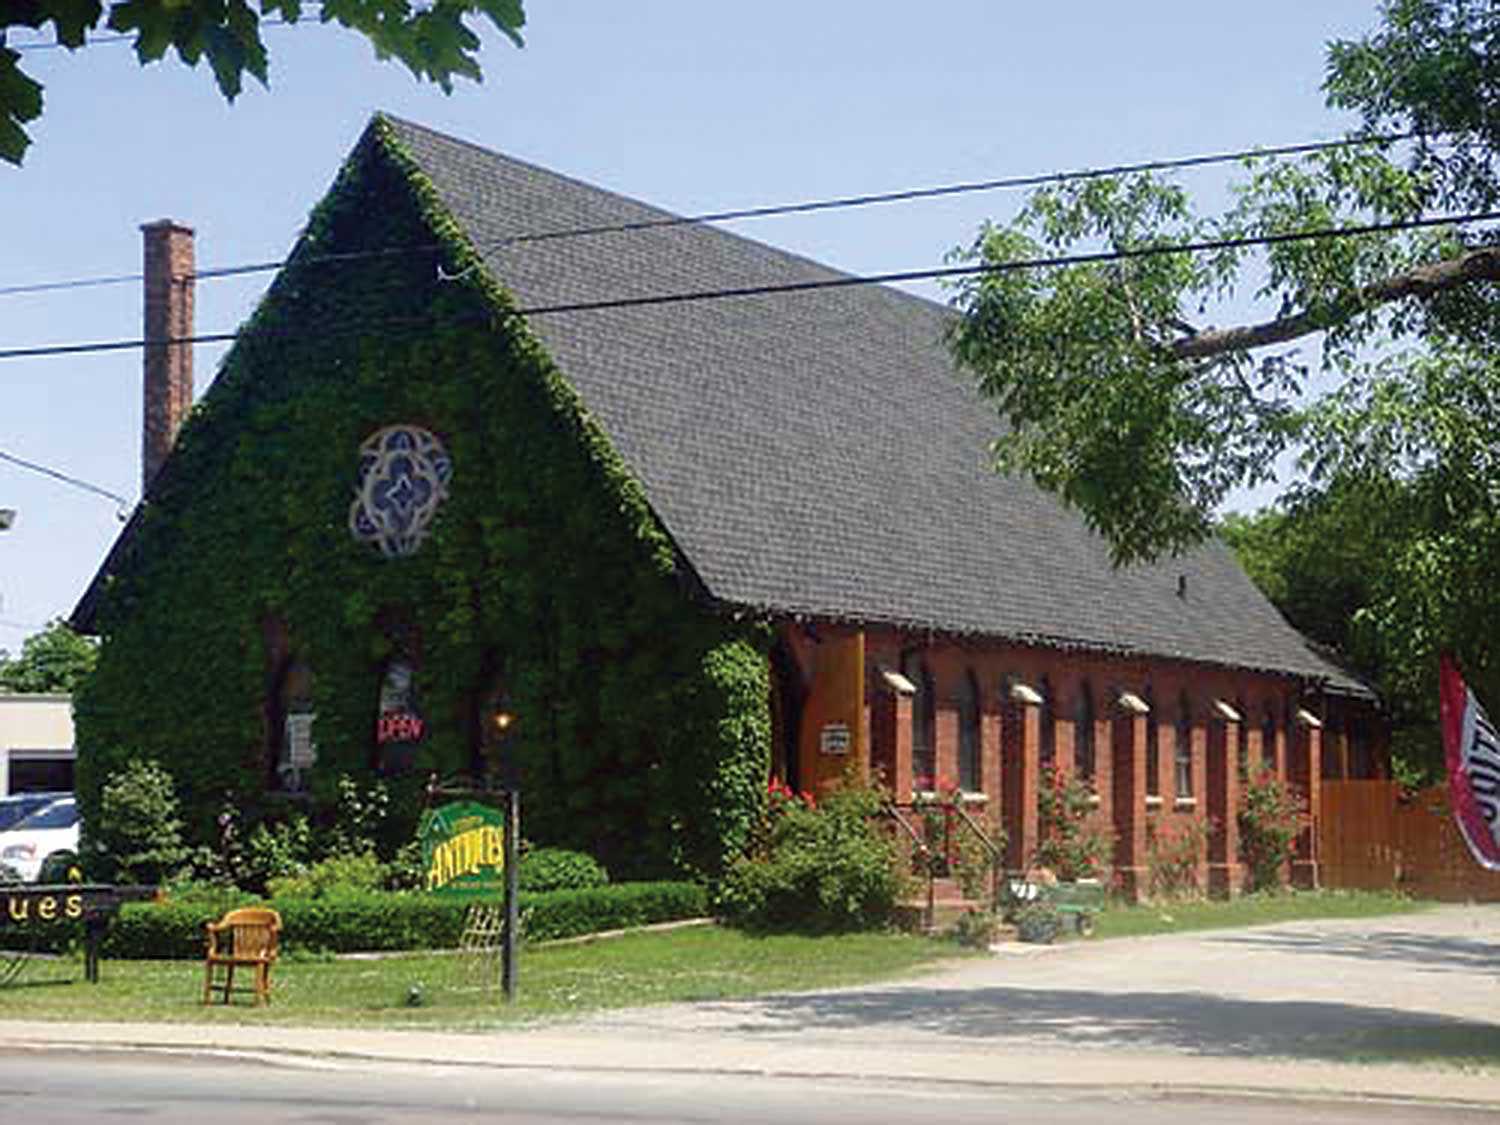 In Niagara-on-the-Lake, Europa Antiques was once St. John’s Anglican Church